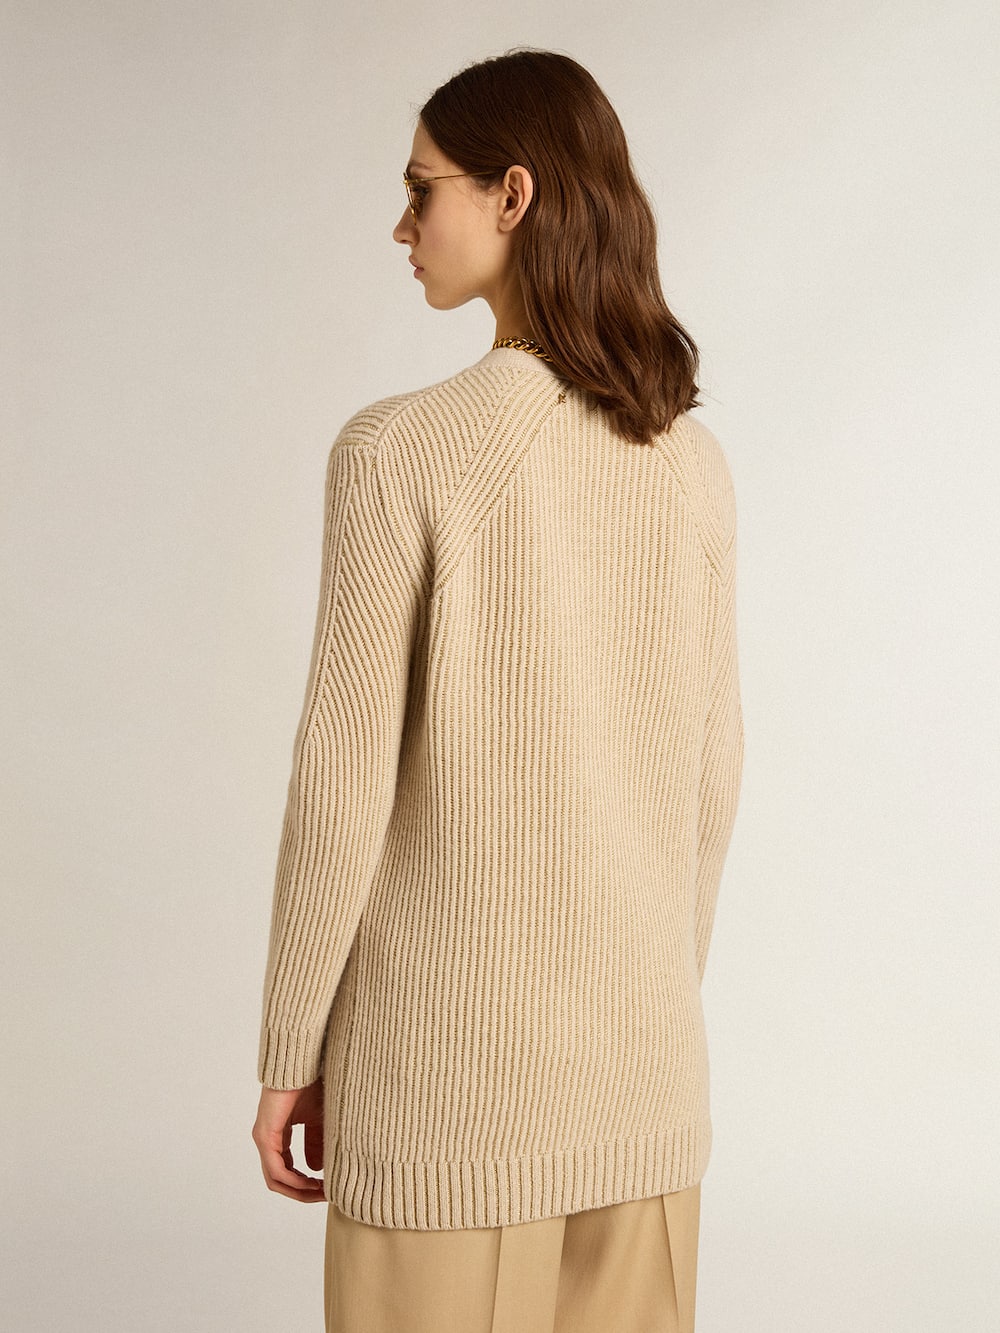 Golden Goose - Wool blend cardigan with fisherman’s rib knit in 